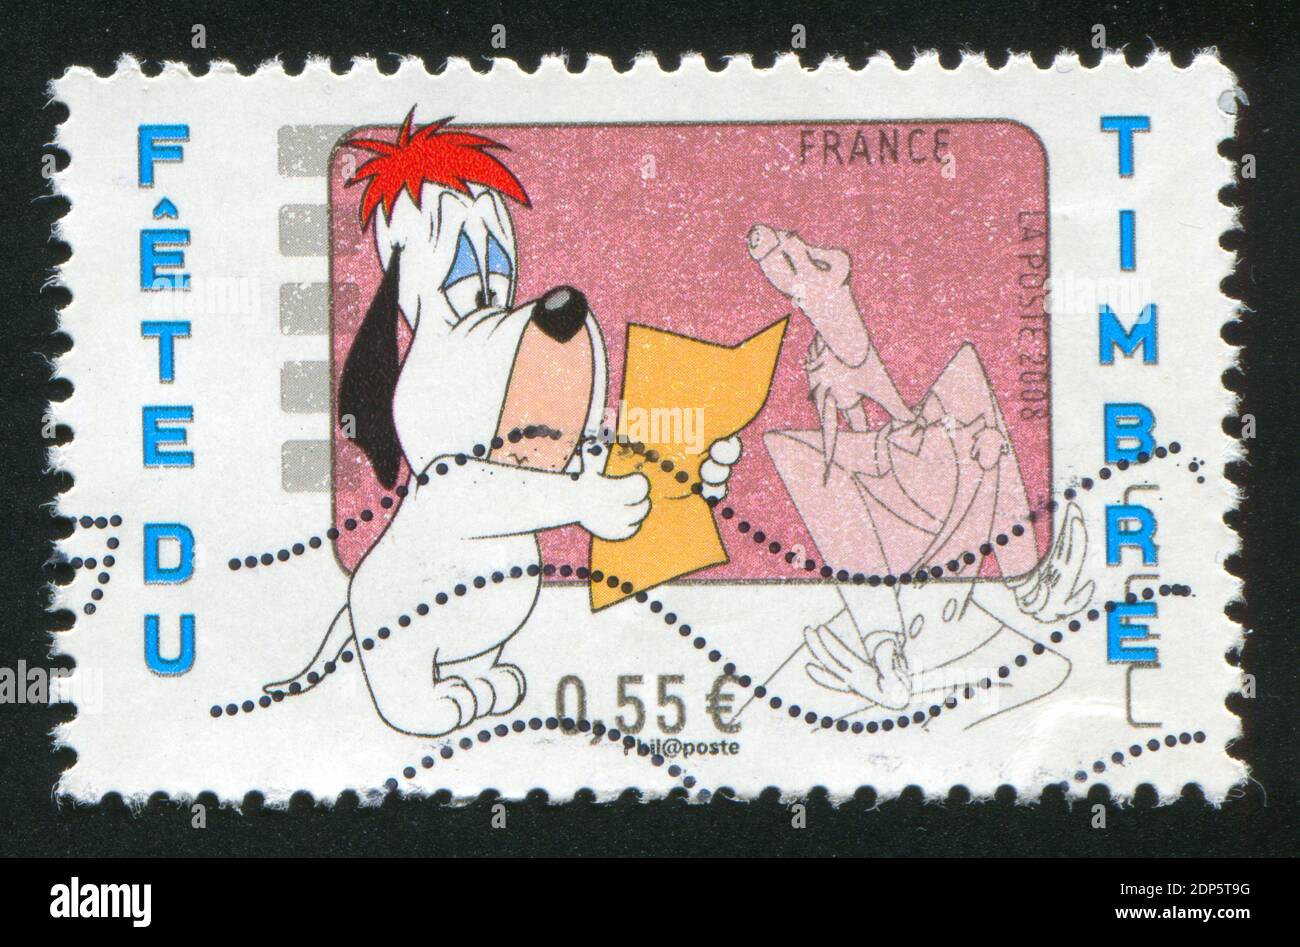 FRANCE - CIRCA 2008: stamp printed by France, shows Droopy, circa 2008 Stock Photo